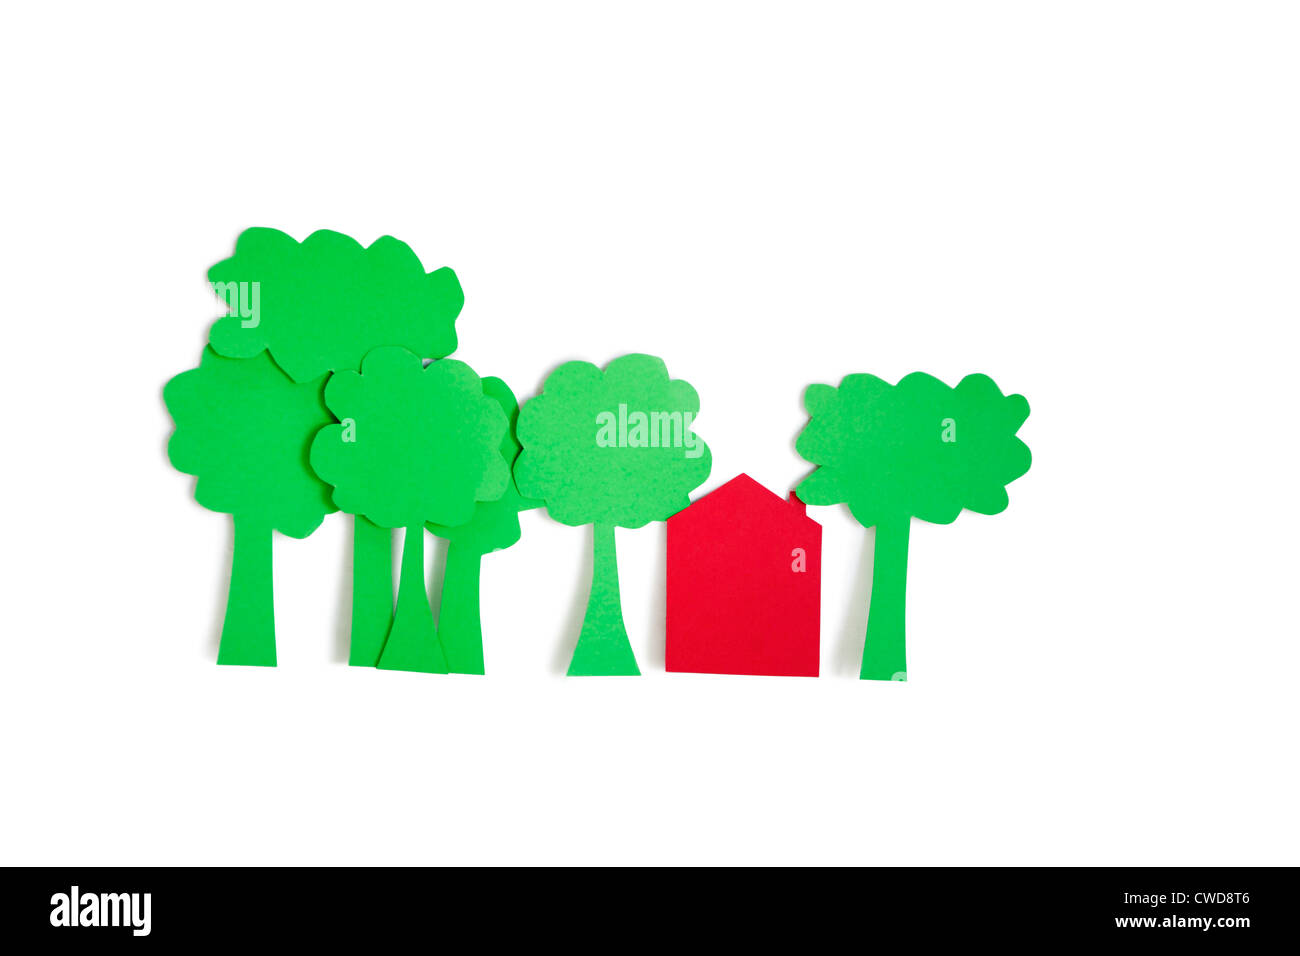 Paper cut outs of trees with a residential house over white background Stock Photo